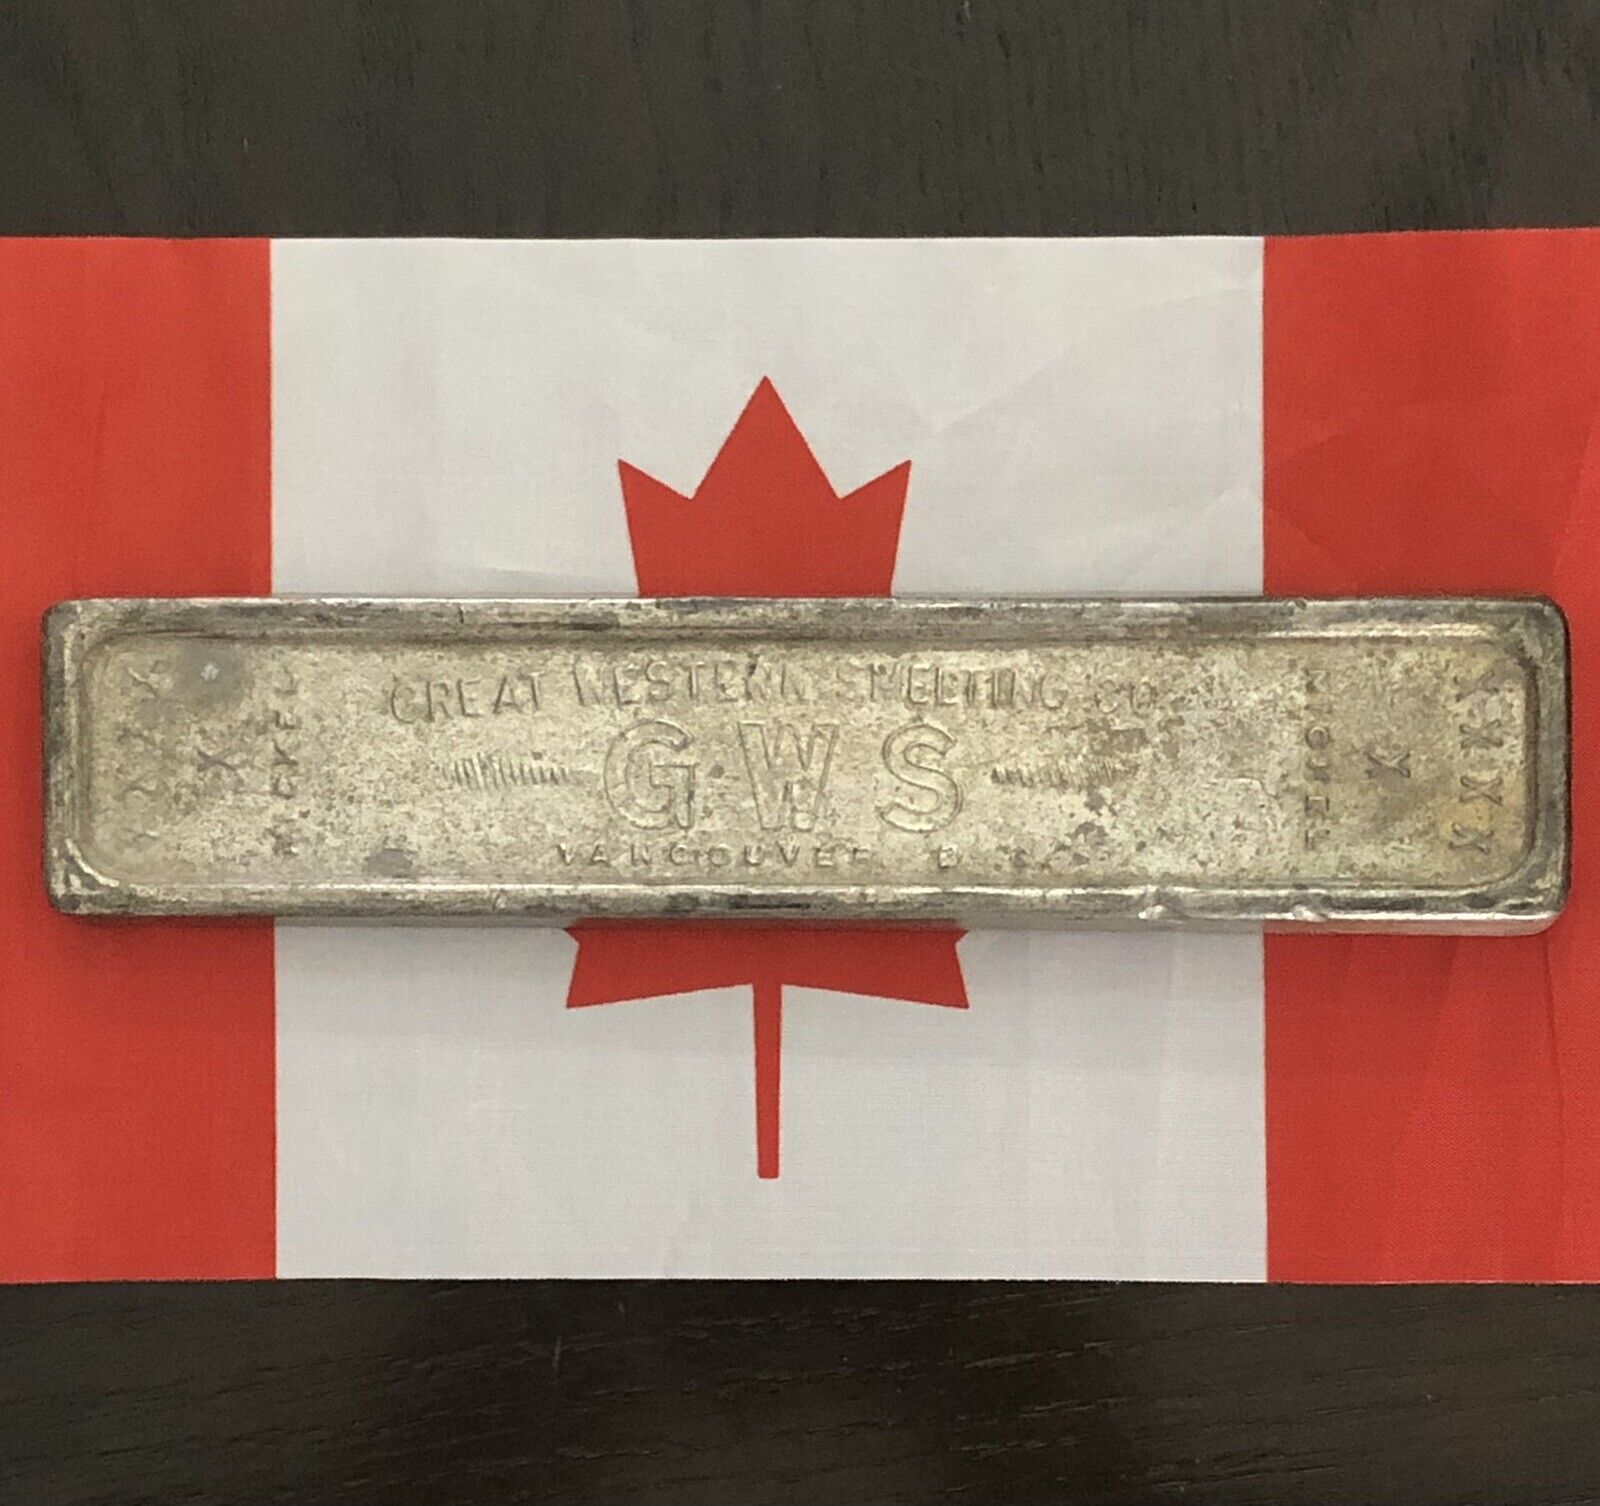 Precious Metal Great Western Smelting Co Vancouver B C Collectable Nickel Ingot